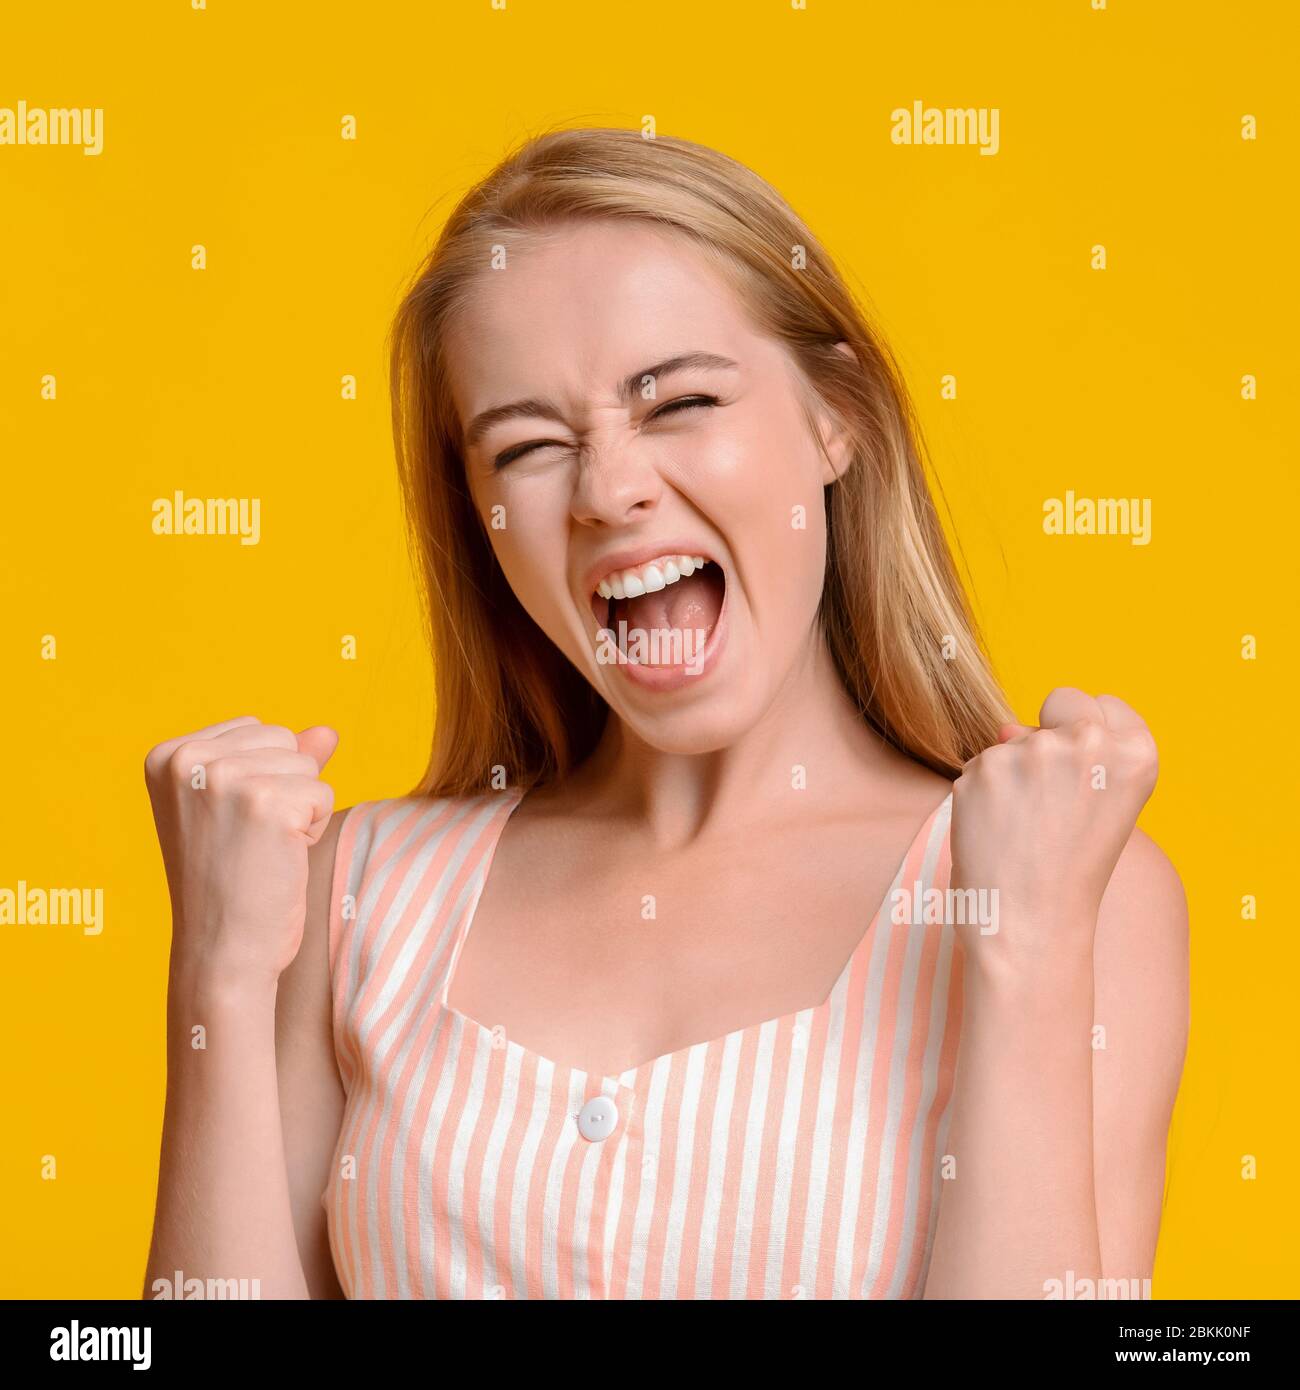 Crazy Sales. Young Girl Emotionally Shouting With Raised Fists, Celebrating Success Stock Photo